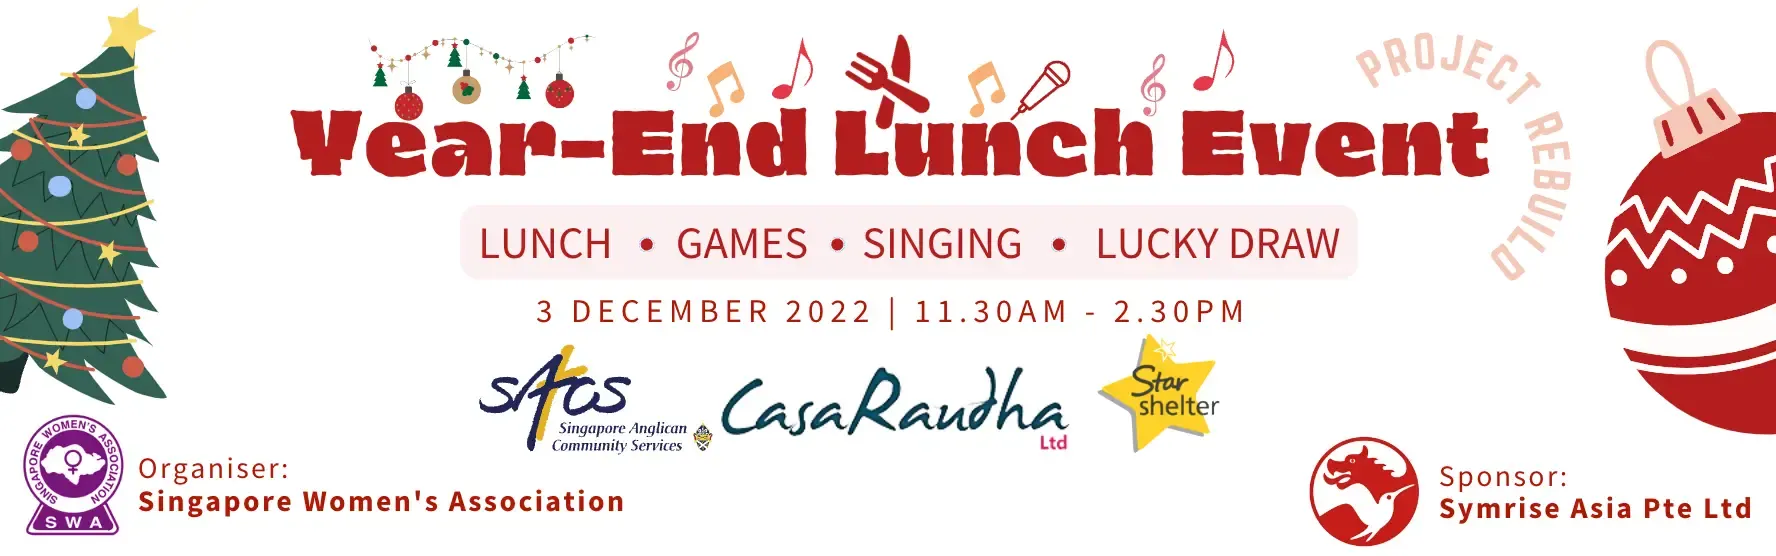 Year-End Lunch Event